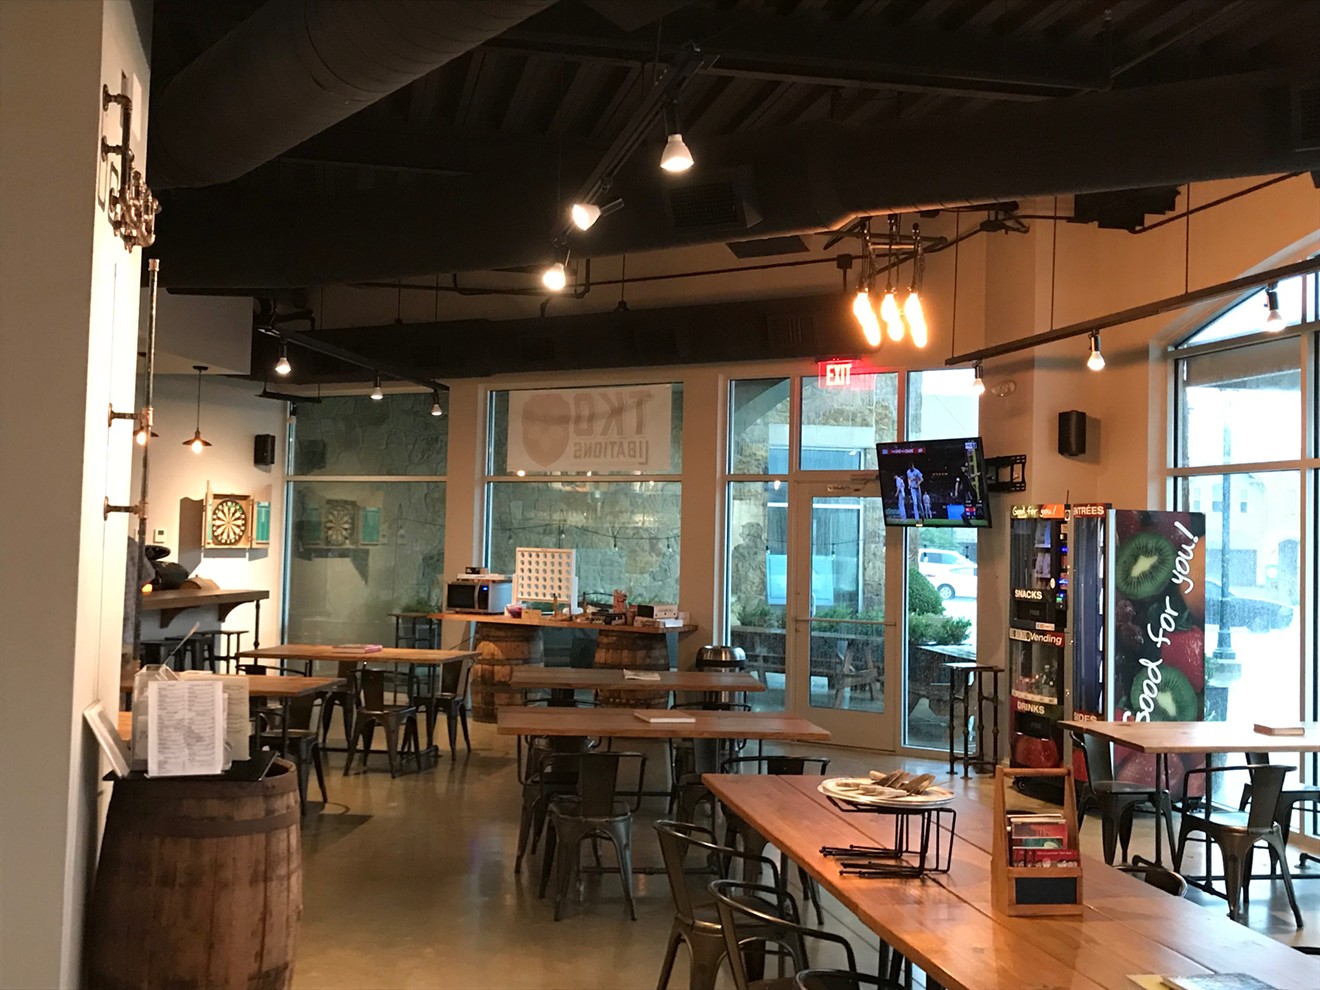 TKO Libations is nestled inside the Castle Hills neighborhood and isn't likely the kind of place you stumble upon by accident.